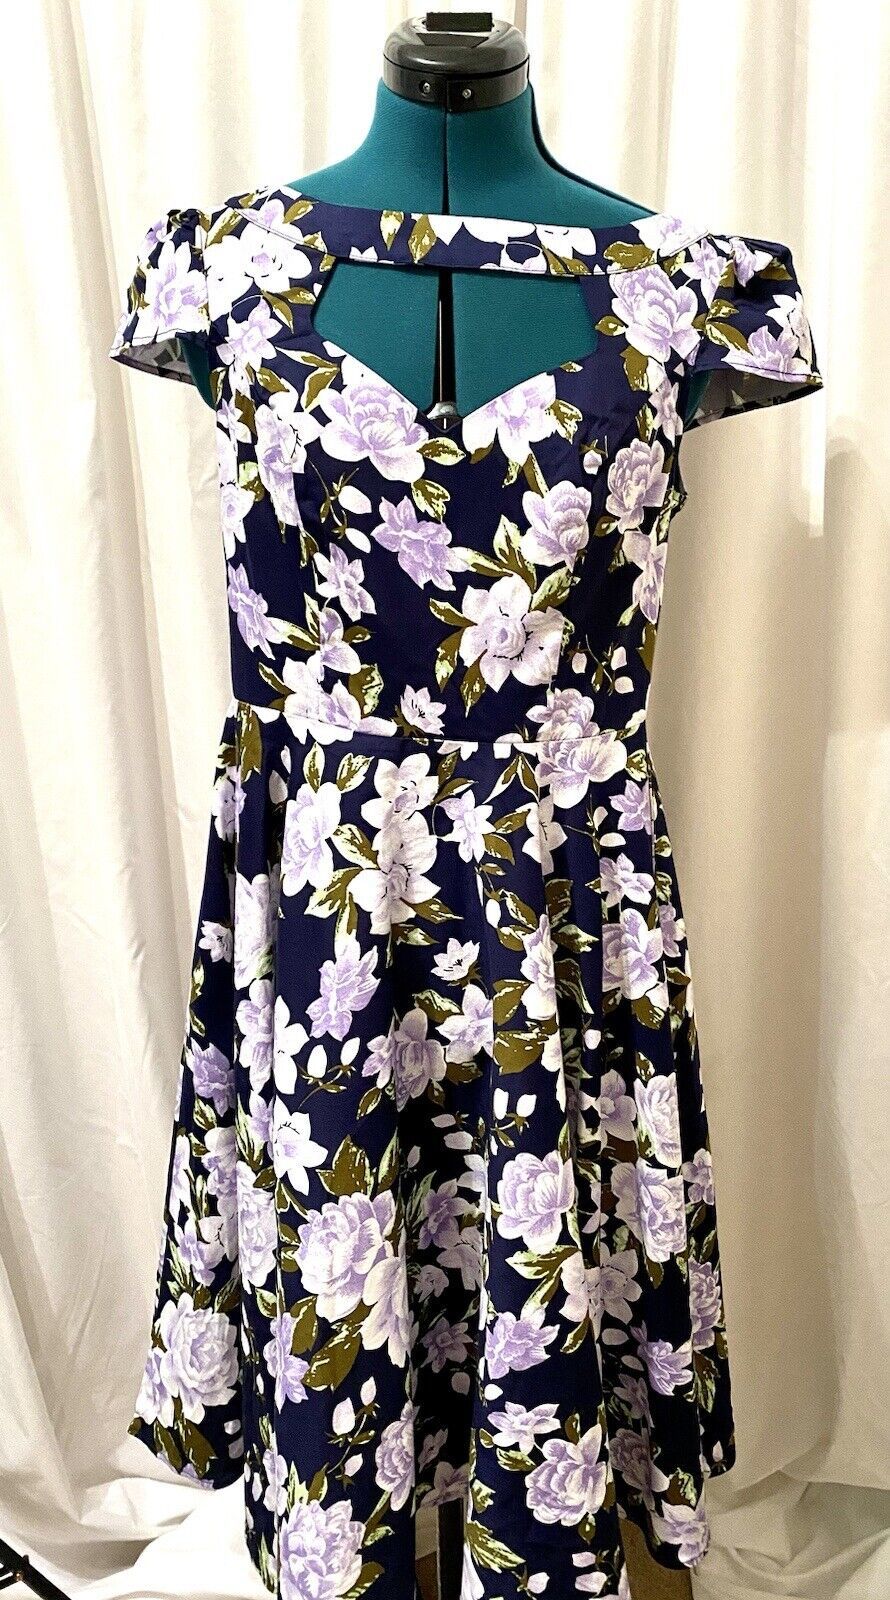 Primary image for Belle Pogue LG Pin Up Rockabilly Navy And Lavender Floral Dress With Full Skirt